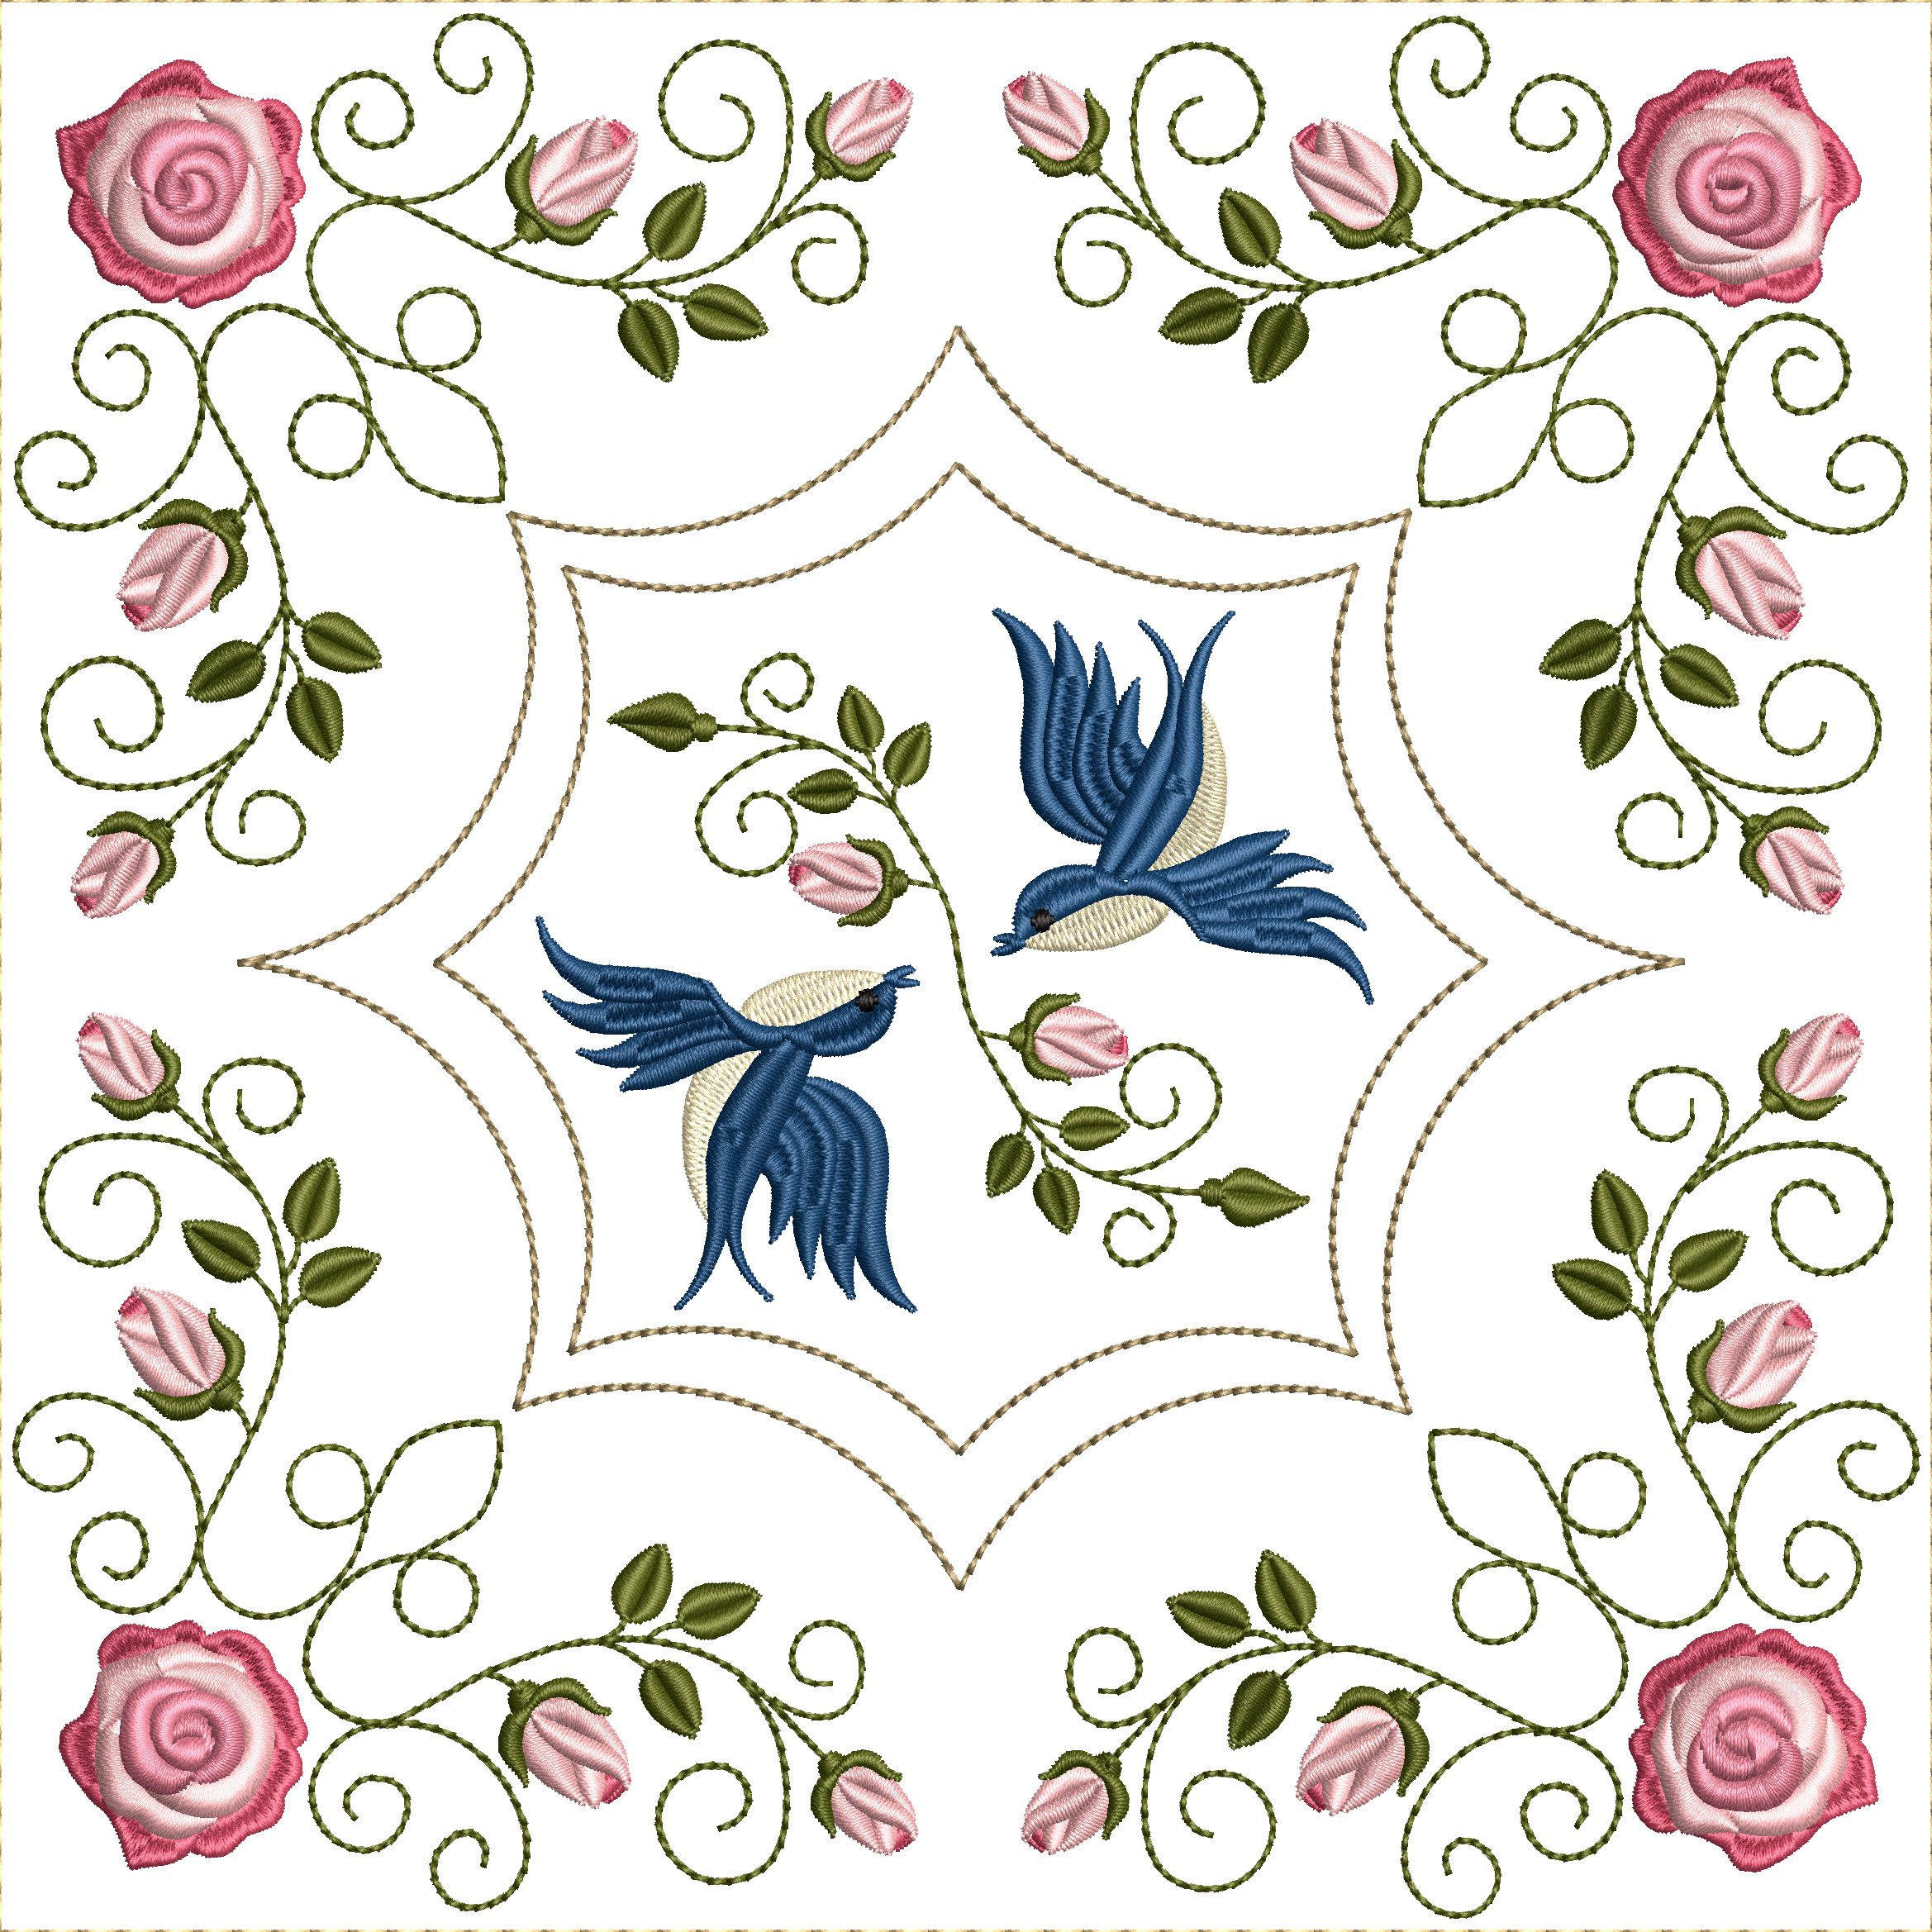 Bluebirds and Roses Quilt Blocks 8x8-9